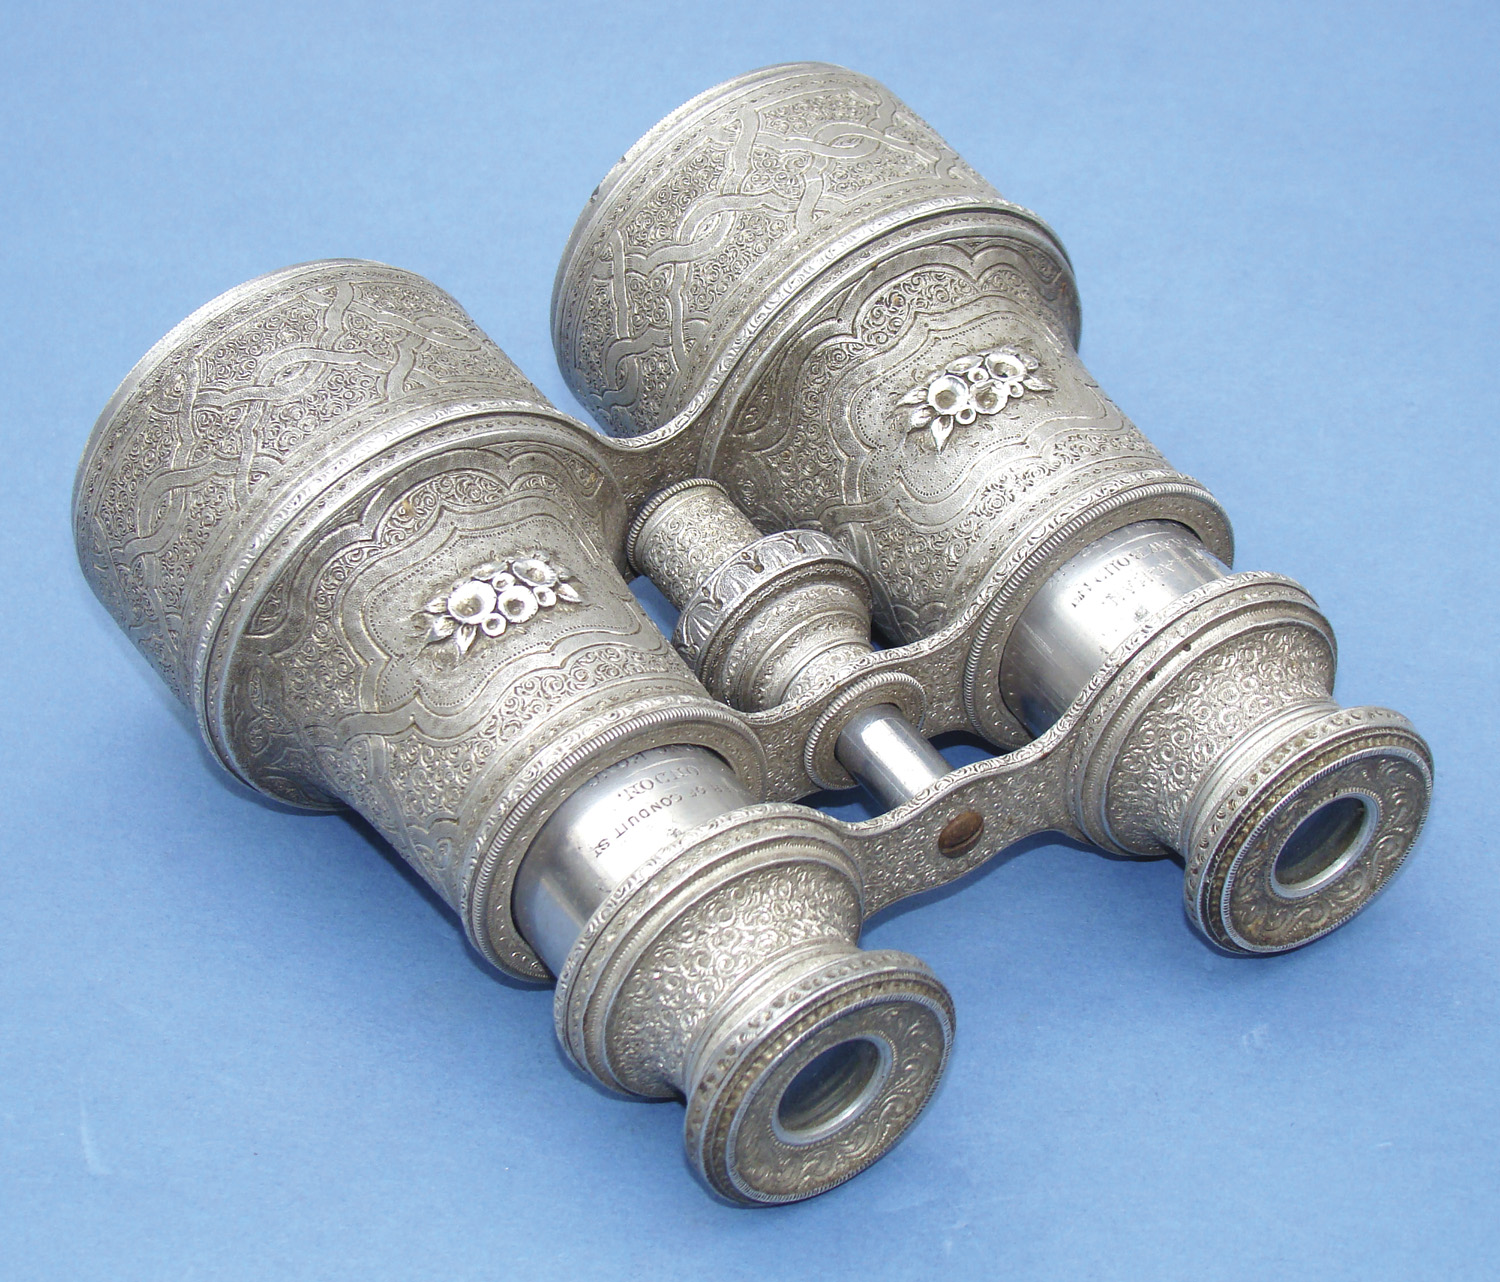 THE ULTIMATE IN DECORATION ON ALUMINUM — ENGLISH BINOCULARS FOR THE CHINESE MARKET